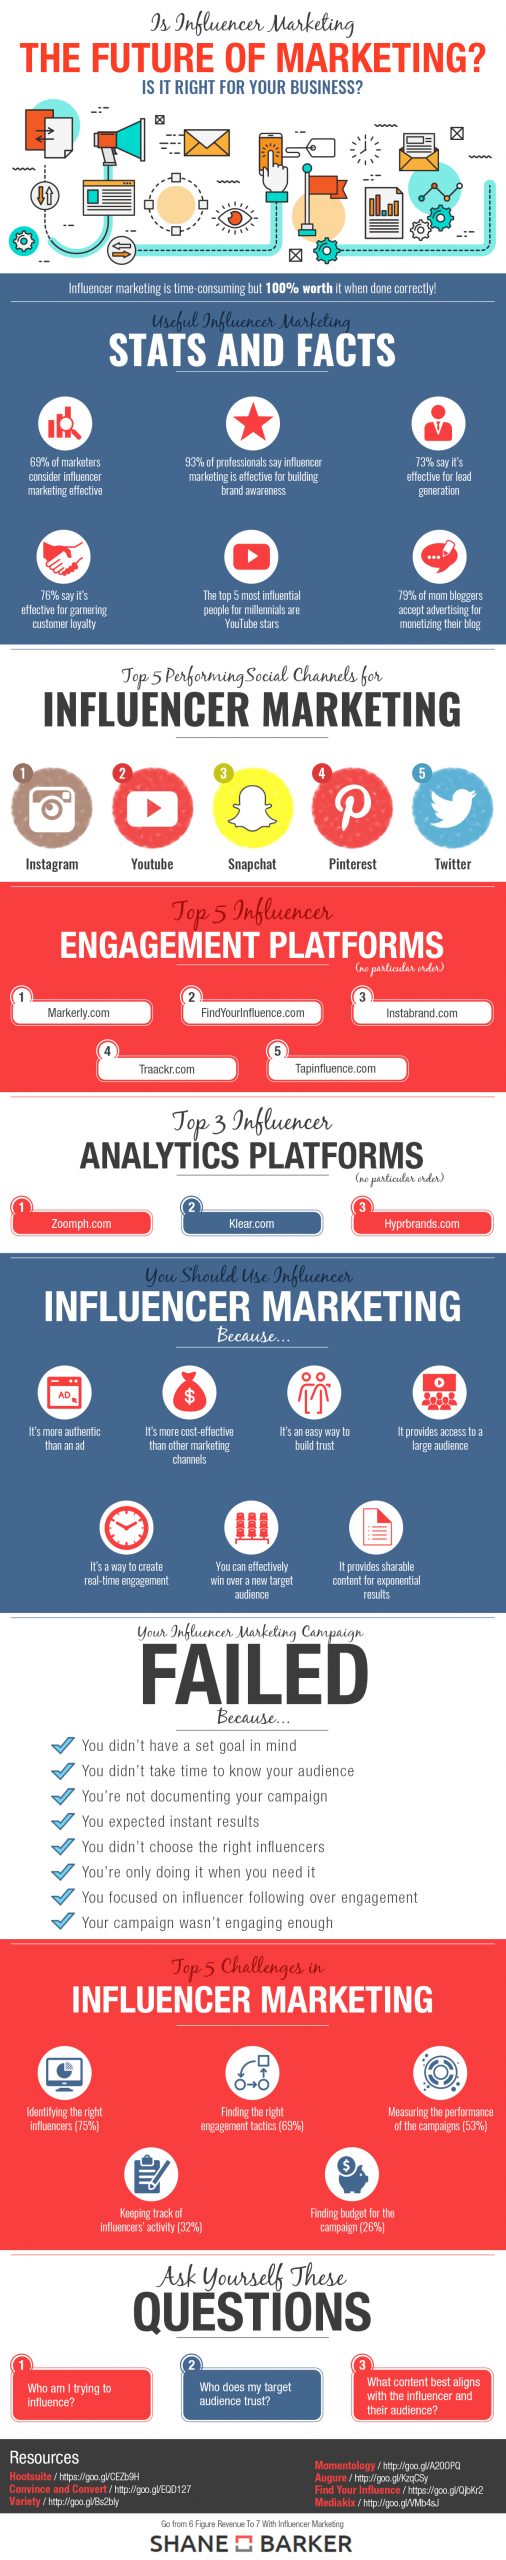 is influencer marketing the future of marketing